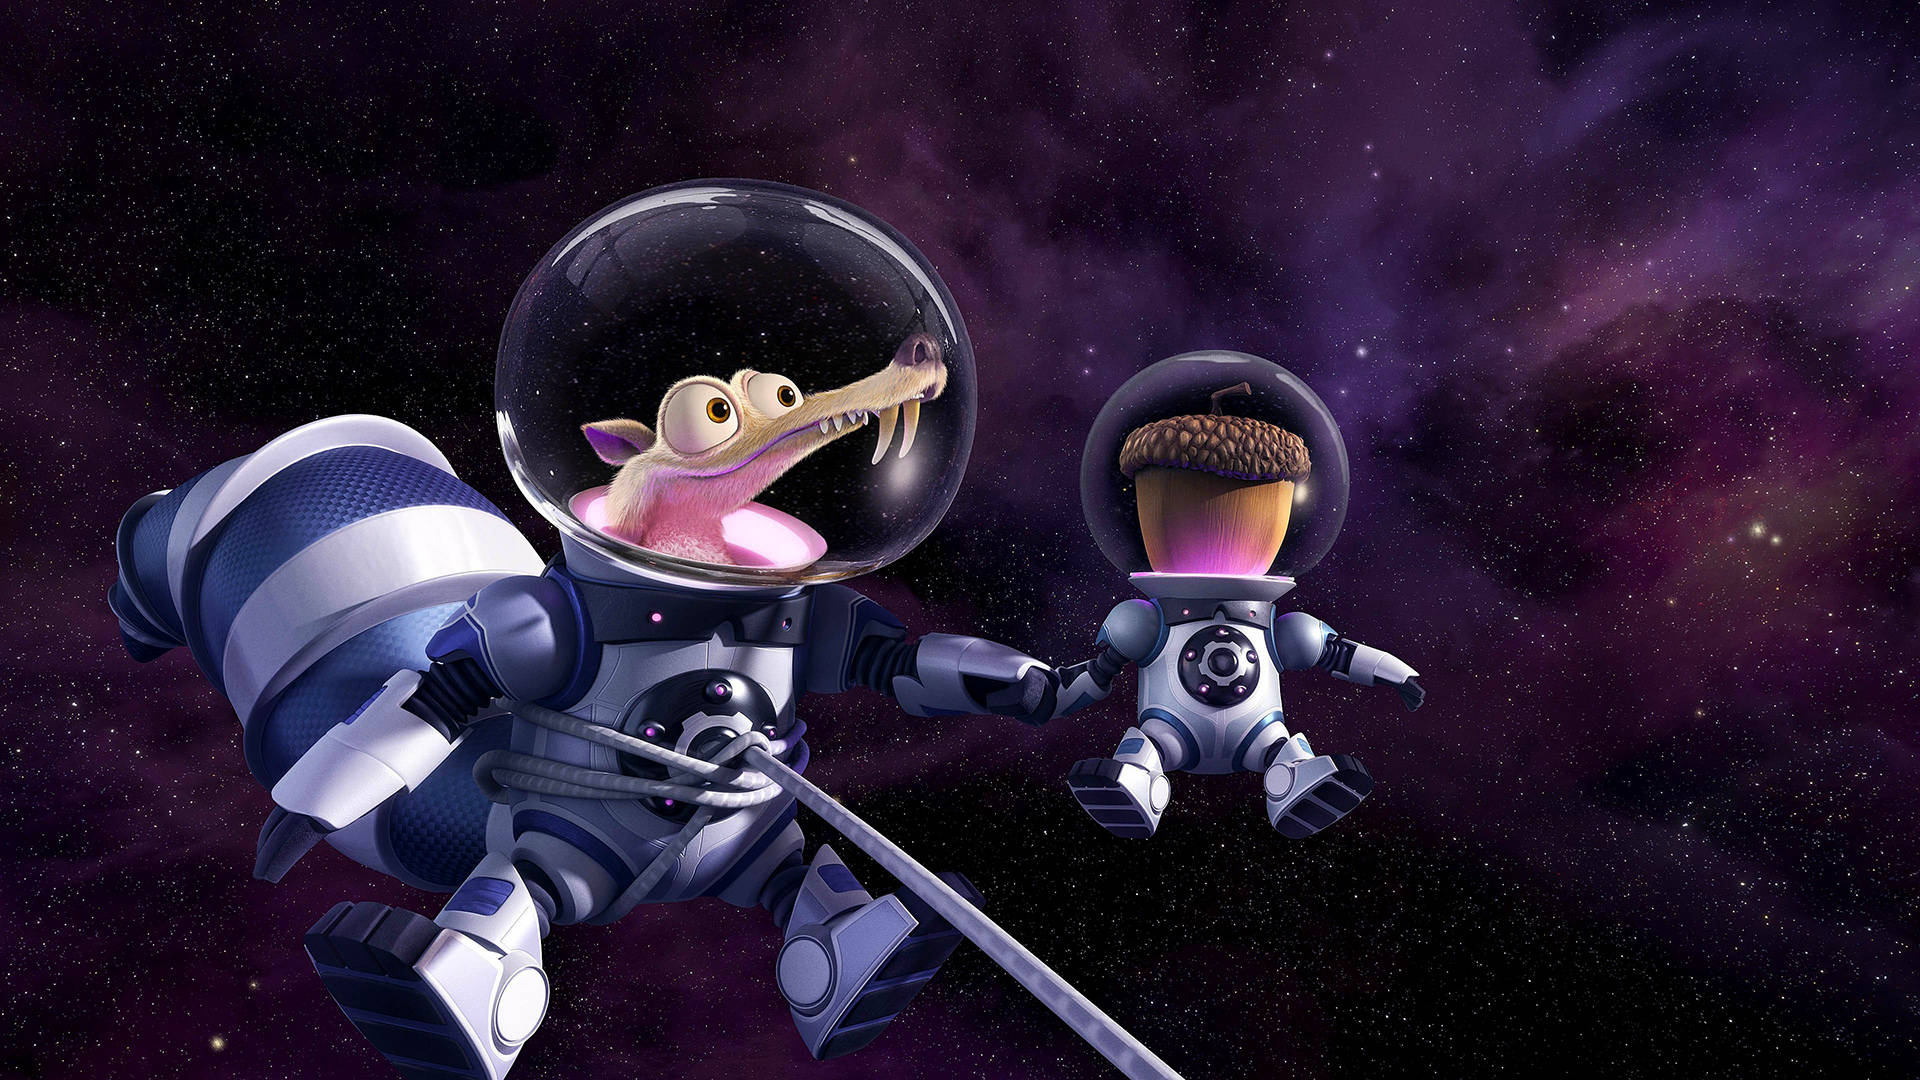 Floating Scrat Ice Age Collision Course Wallpaper